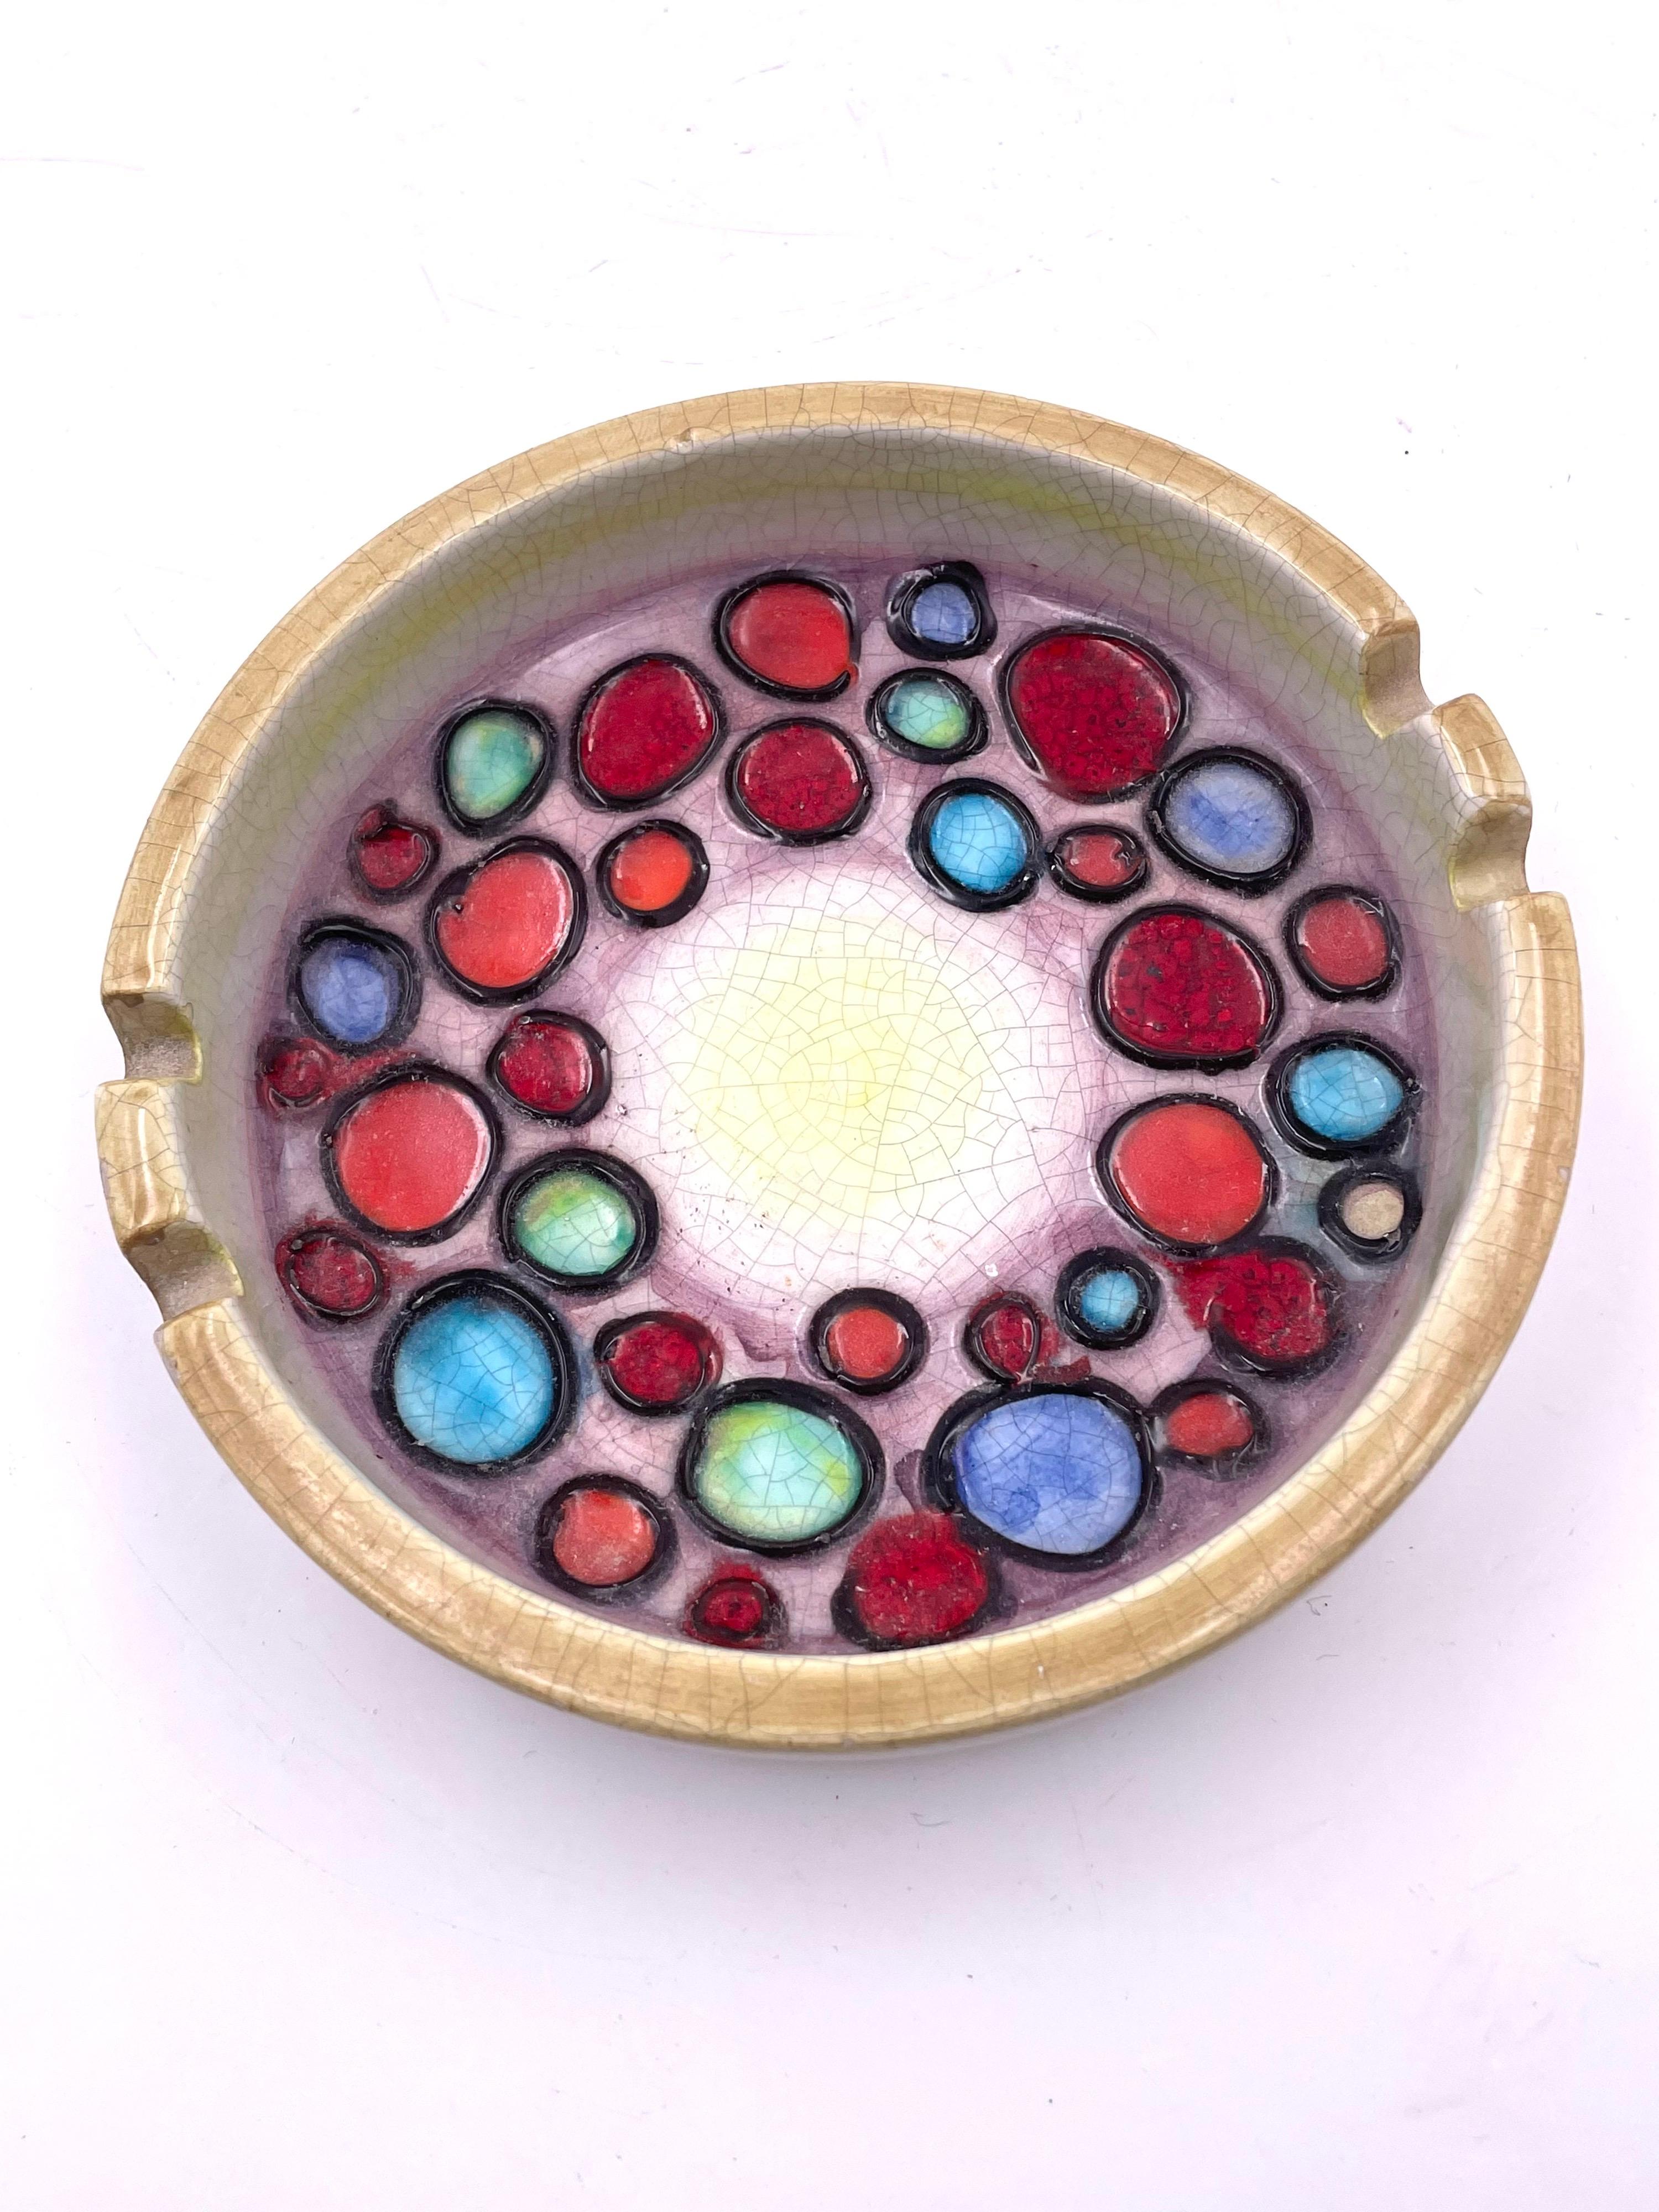 Stunning multi color combination on this large glazed ashtray by Bitossi for Raymor Imports, circa 1960s. The piece is quite unique and was made in Italy; great decor piece for any Mid-Century Modern setting.